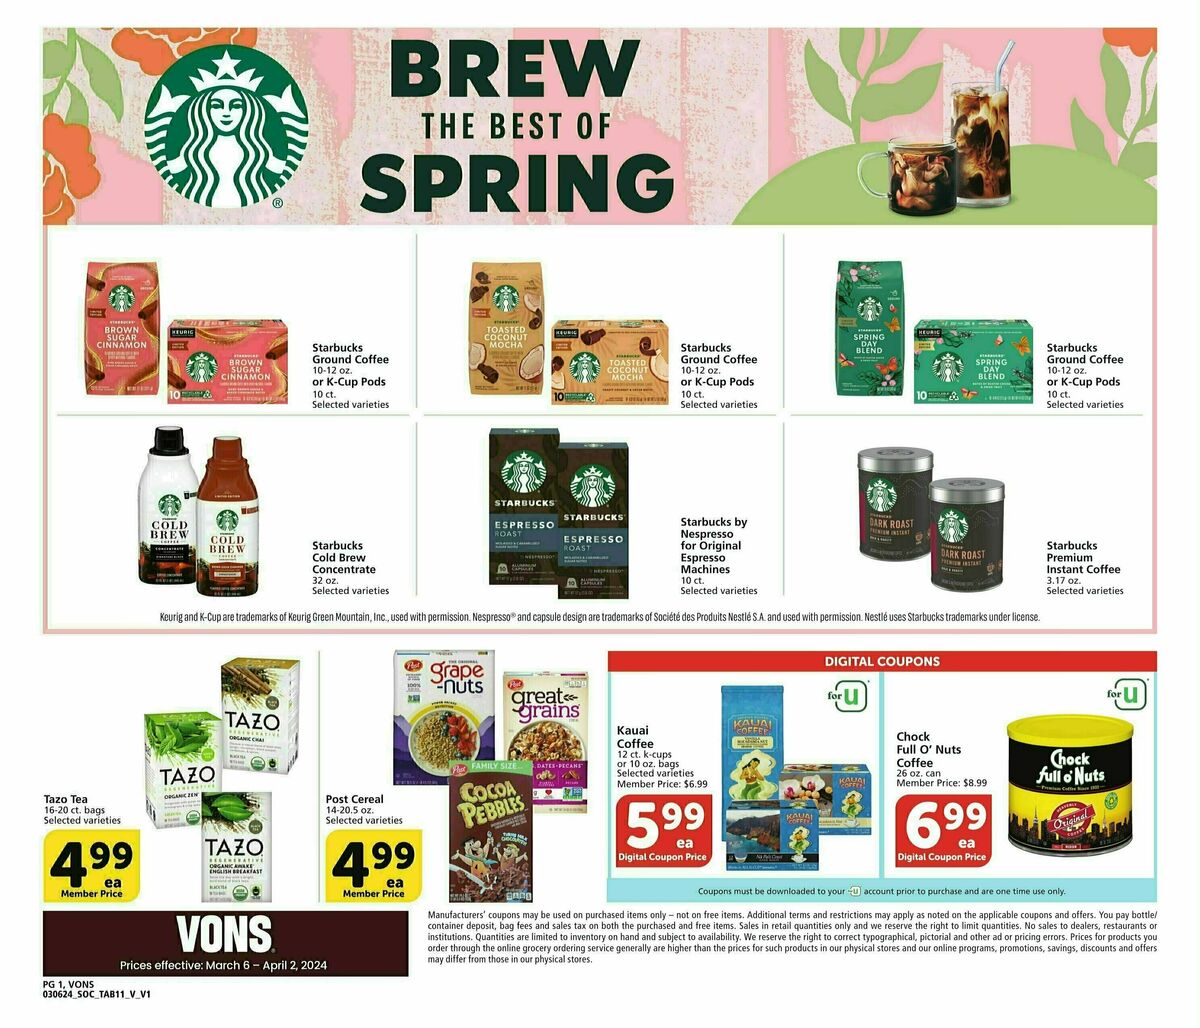 Vons Big Book of Savings Weekly Ad from March 6